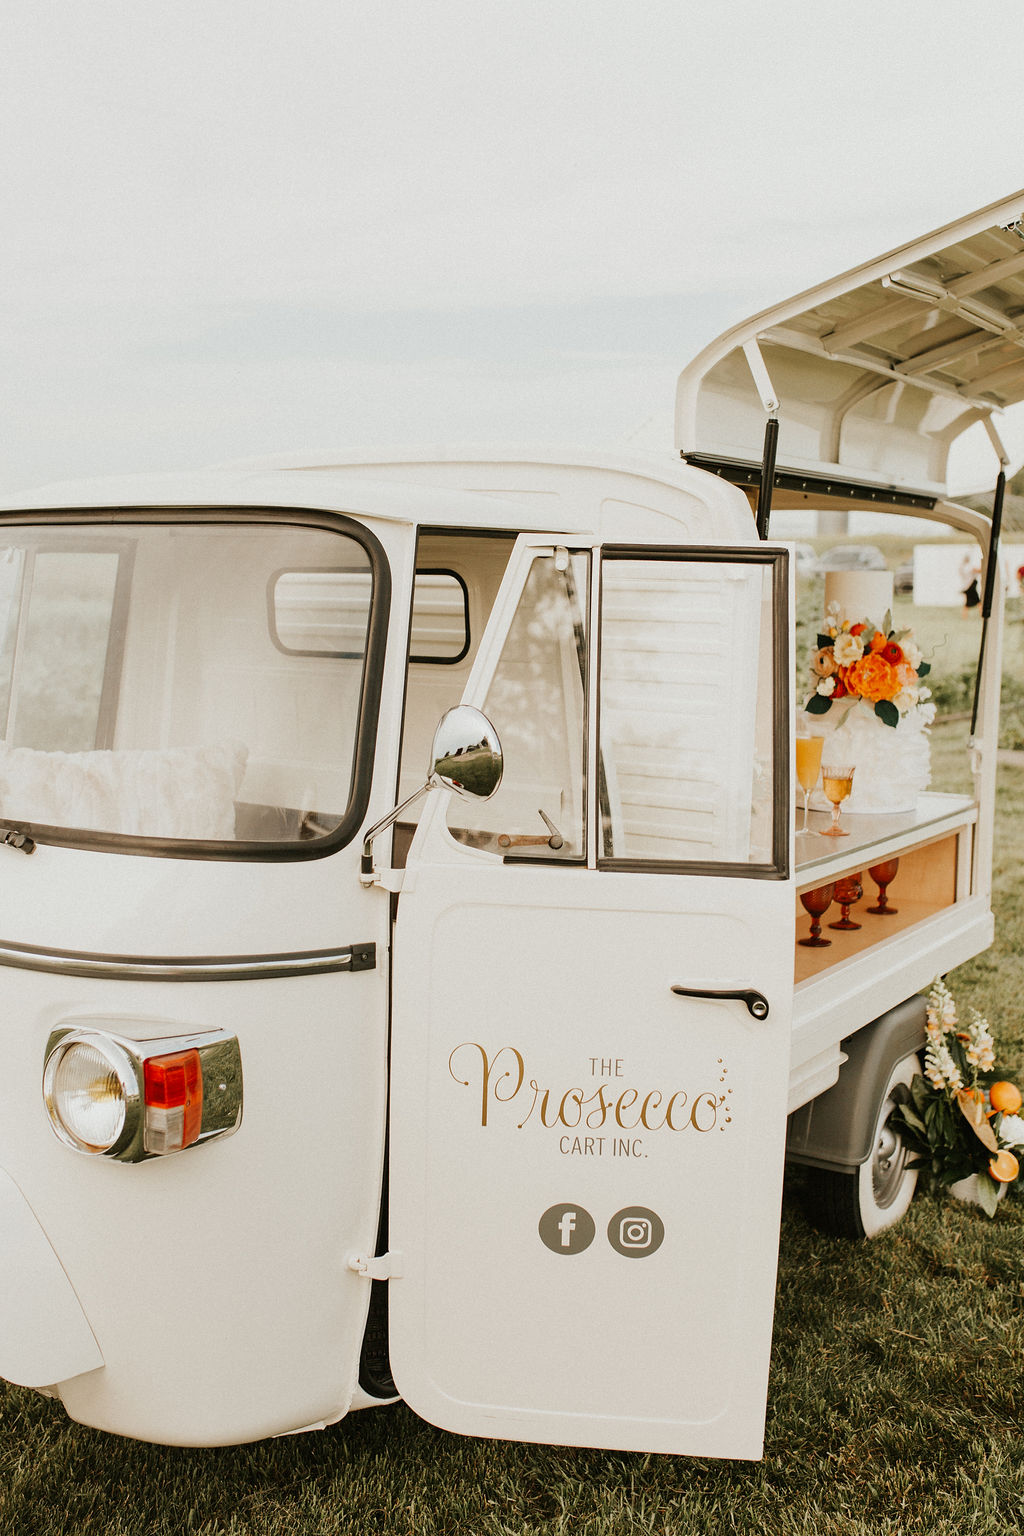 Prosecco mobile bar cart decorated with tangerine accents for a wedding editorial at The Gathered, a wedding venue near Calgary Alberta